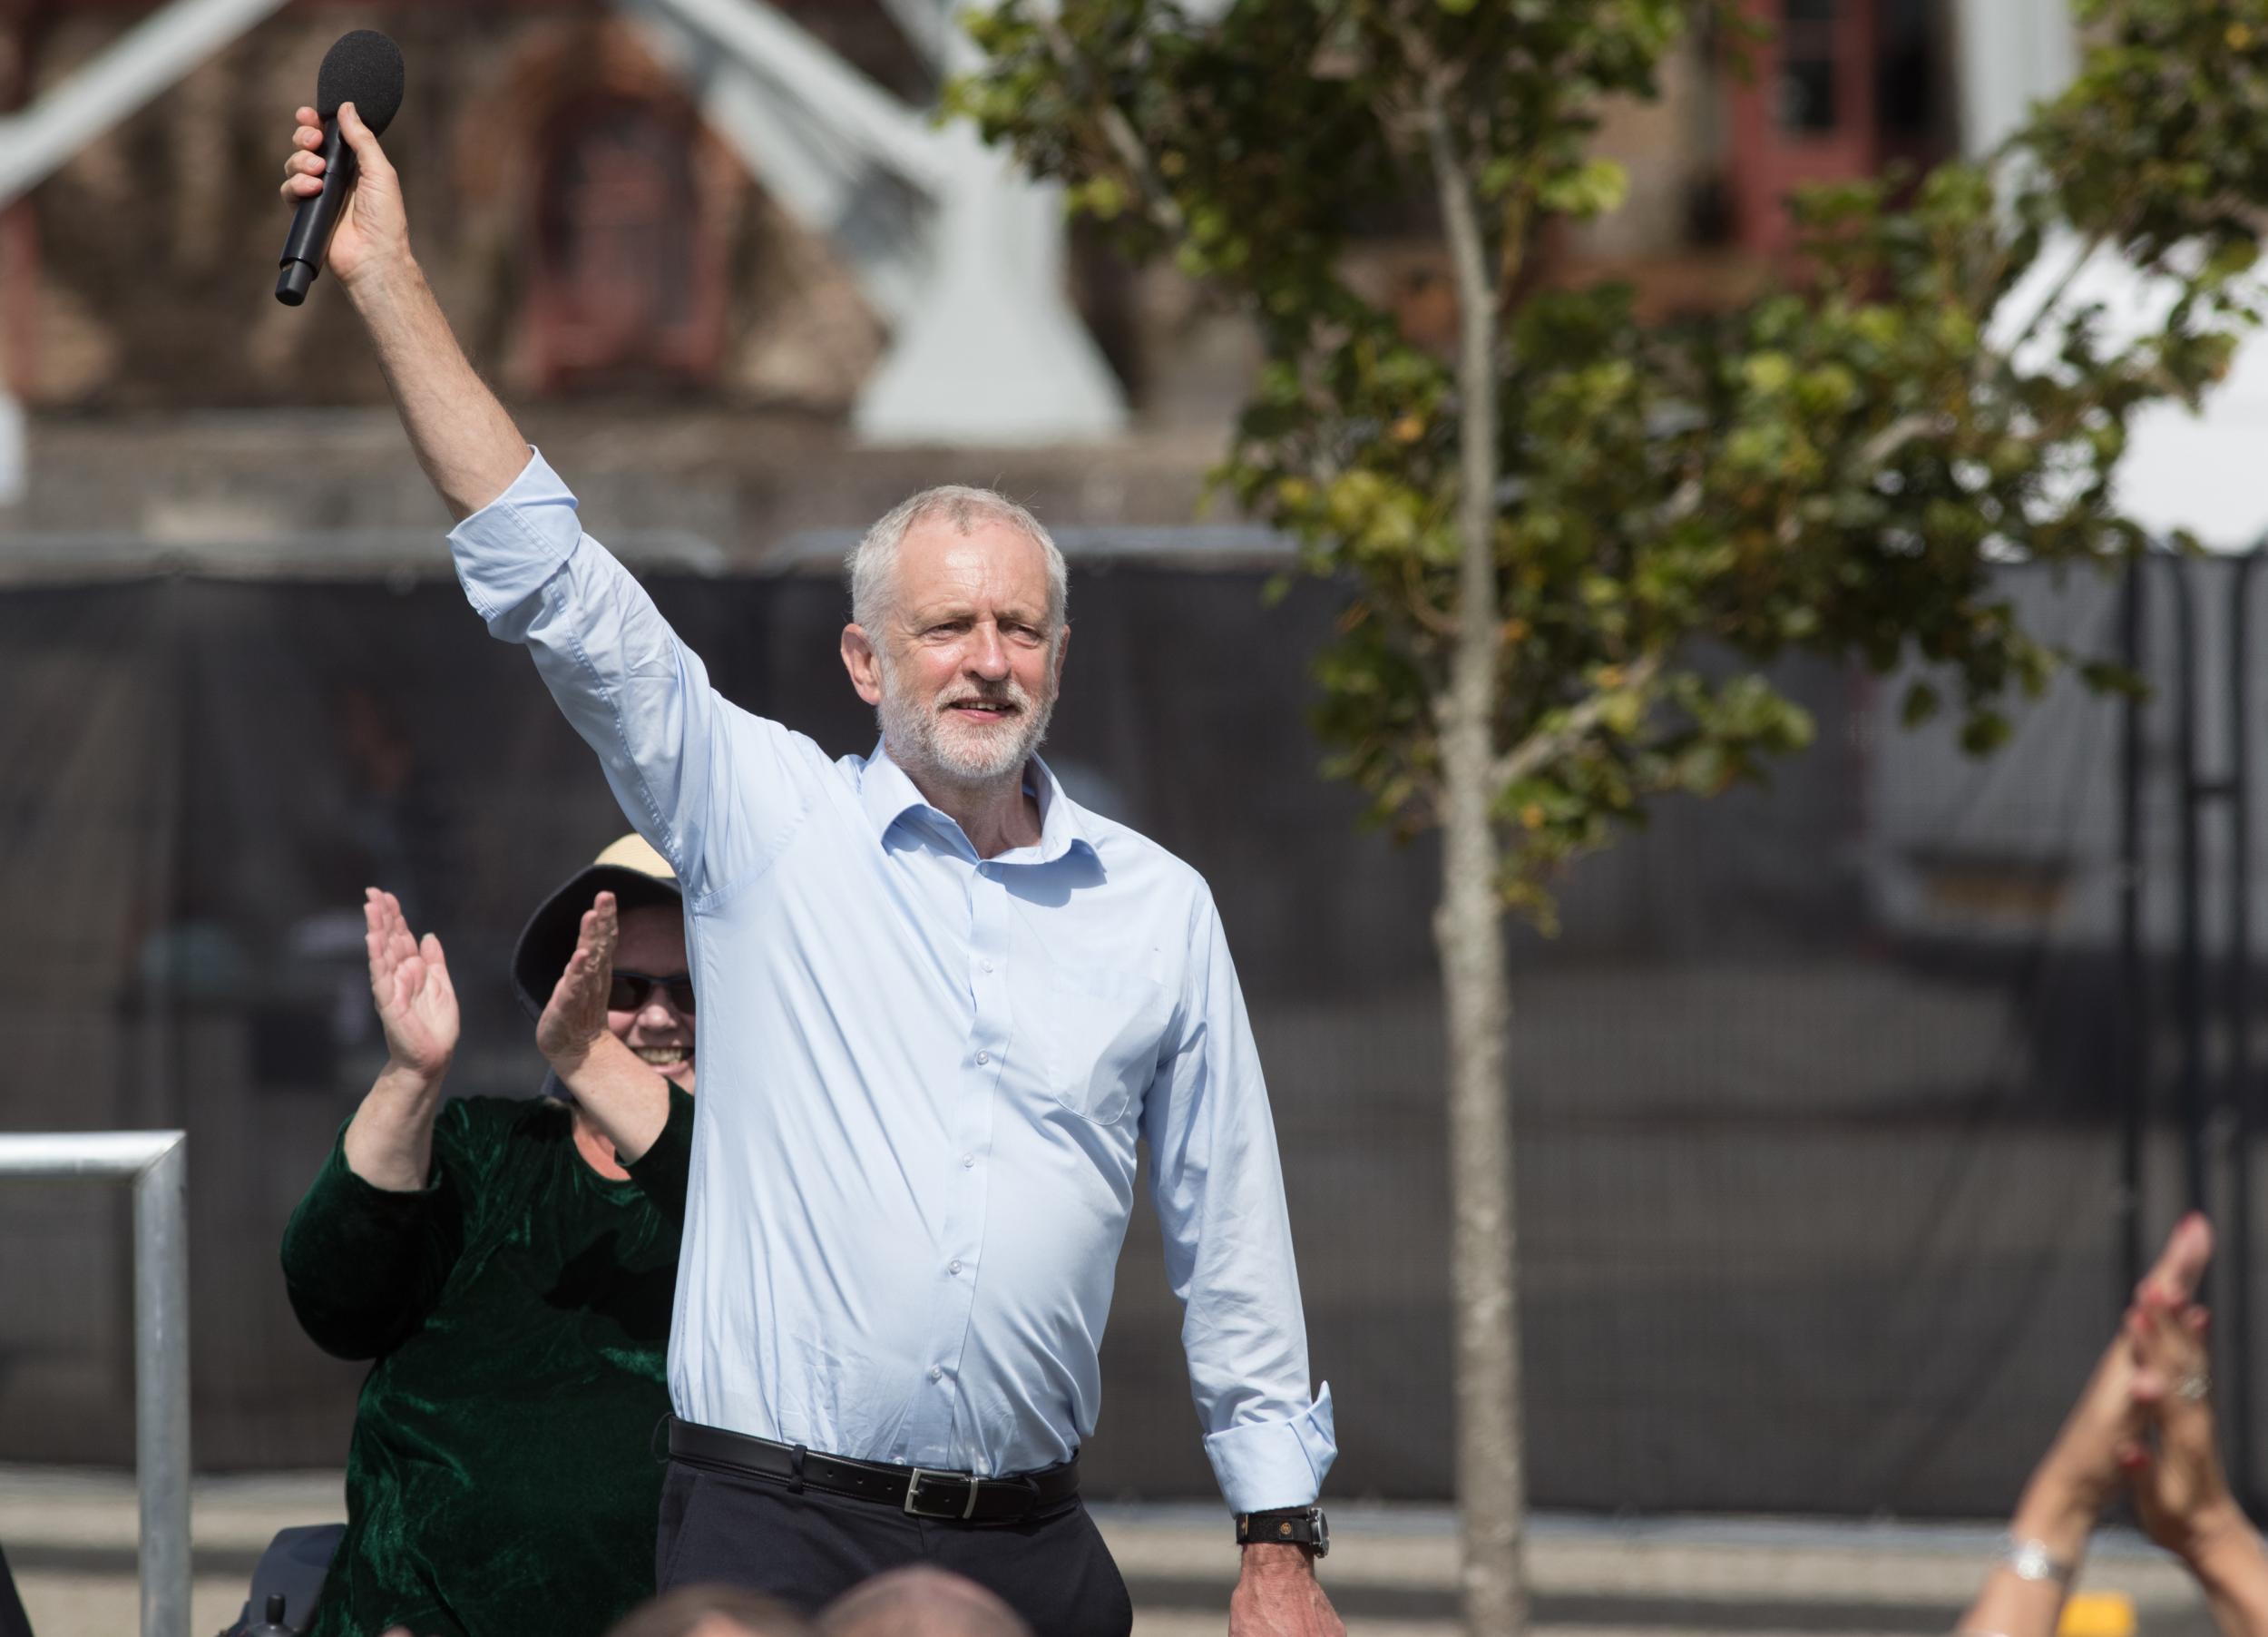 At the election, Jeremy Corbyn’s anti-austerity message caught the public mood